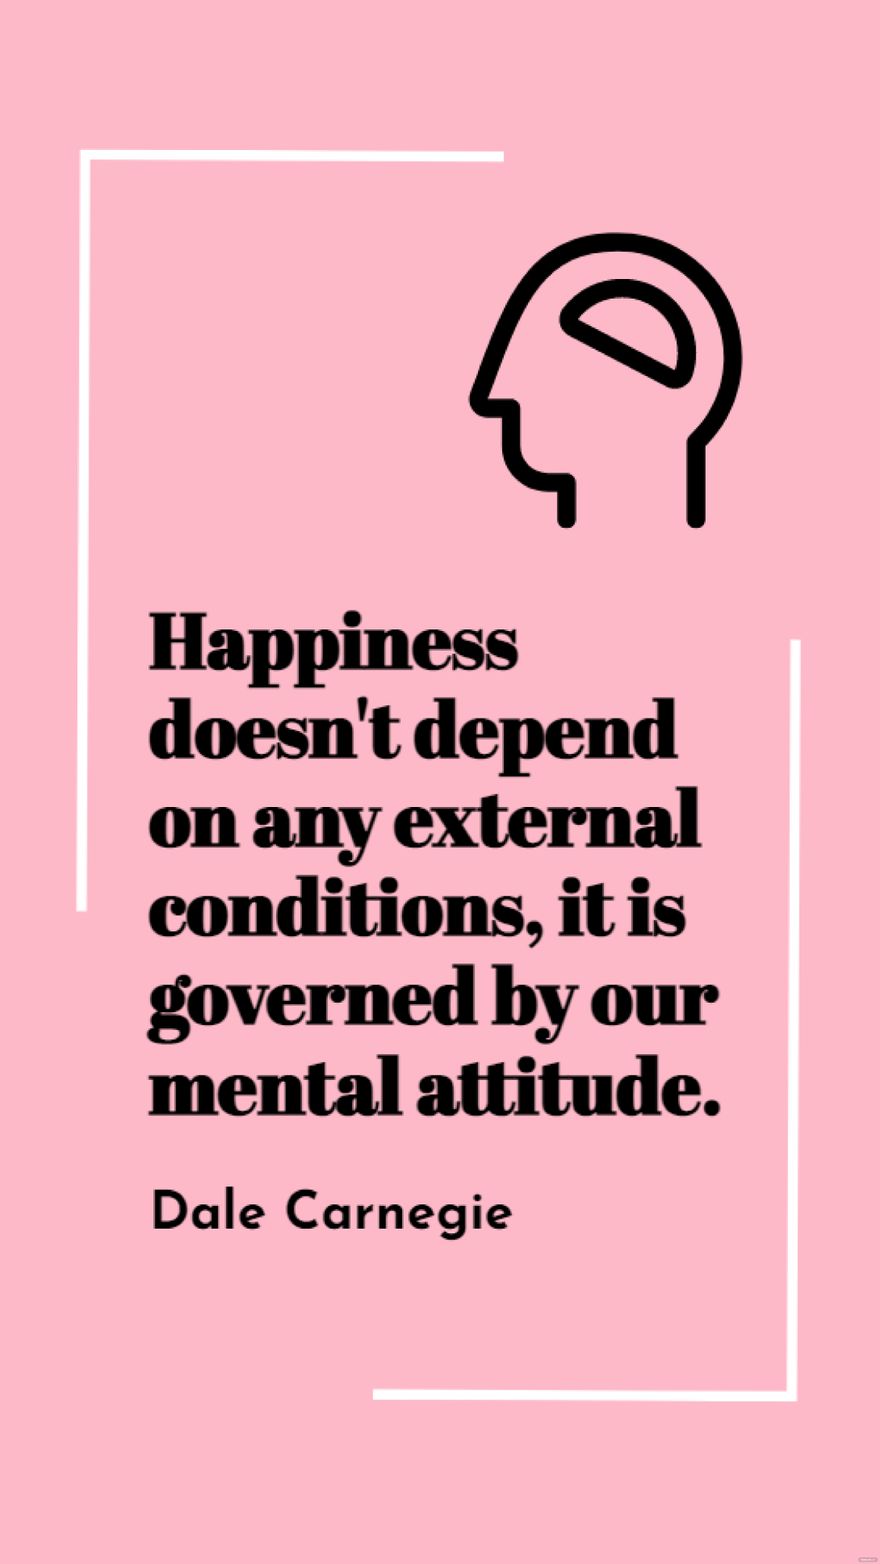 Dale Carnegie - Happiness doesn't depend on any external conditions, it is governed by our mental attitude.